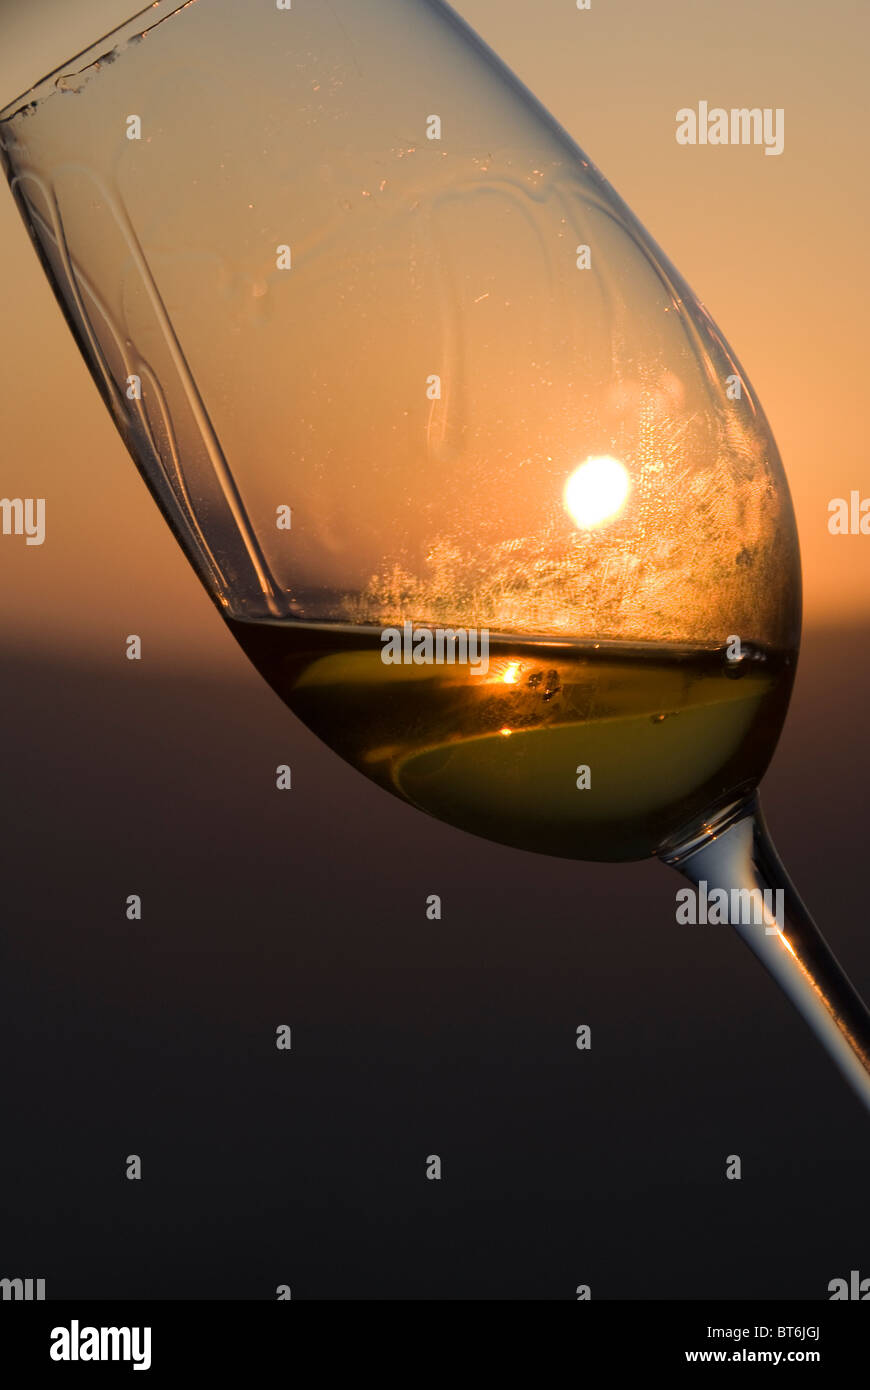 White wine glass in front of the sunset horizon. Stock Photo